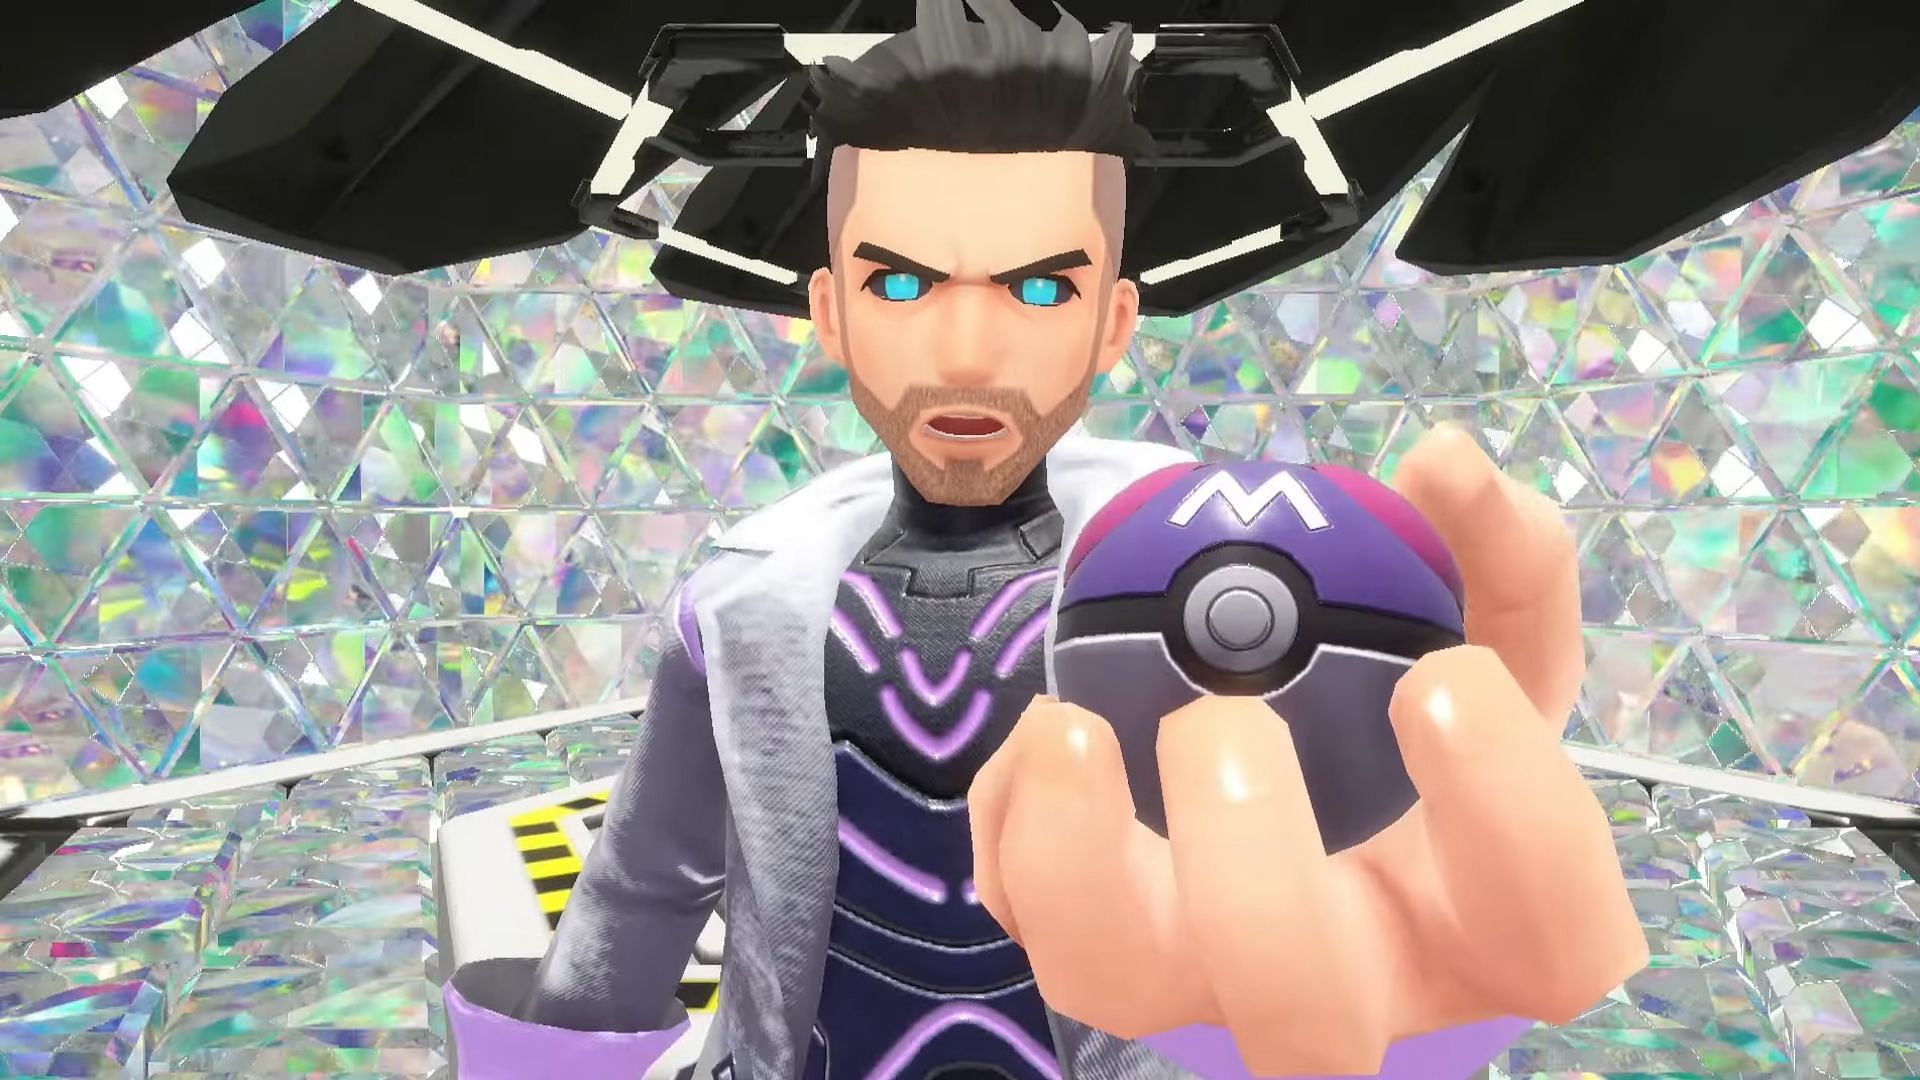 You can get multiple Master Balls, thanks to these Discord bots